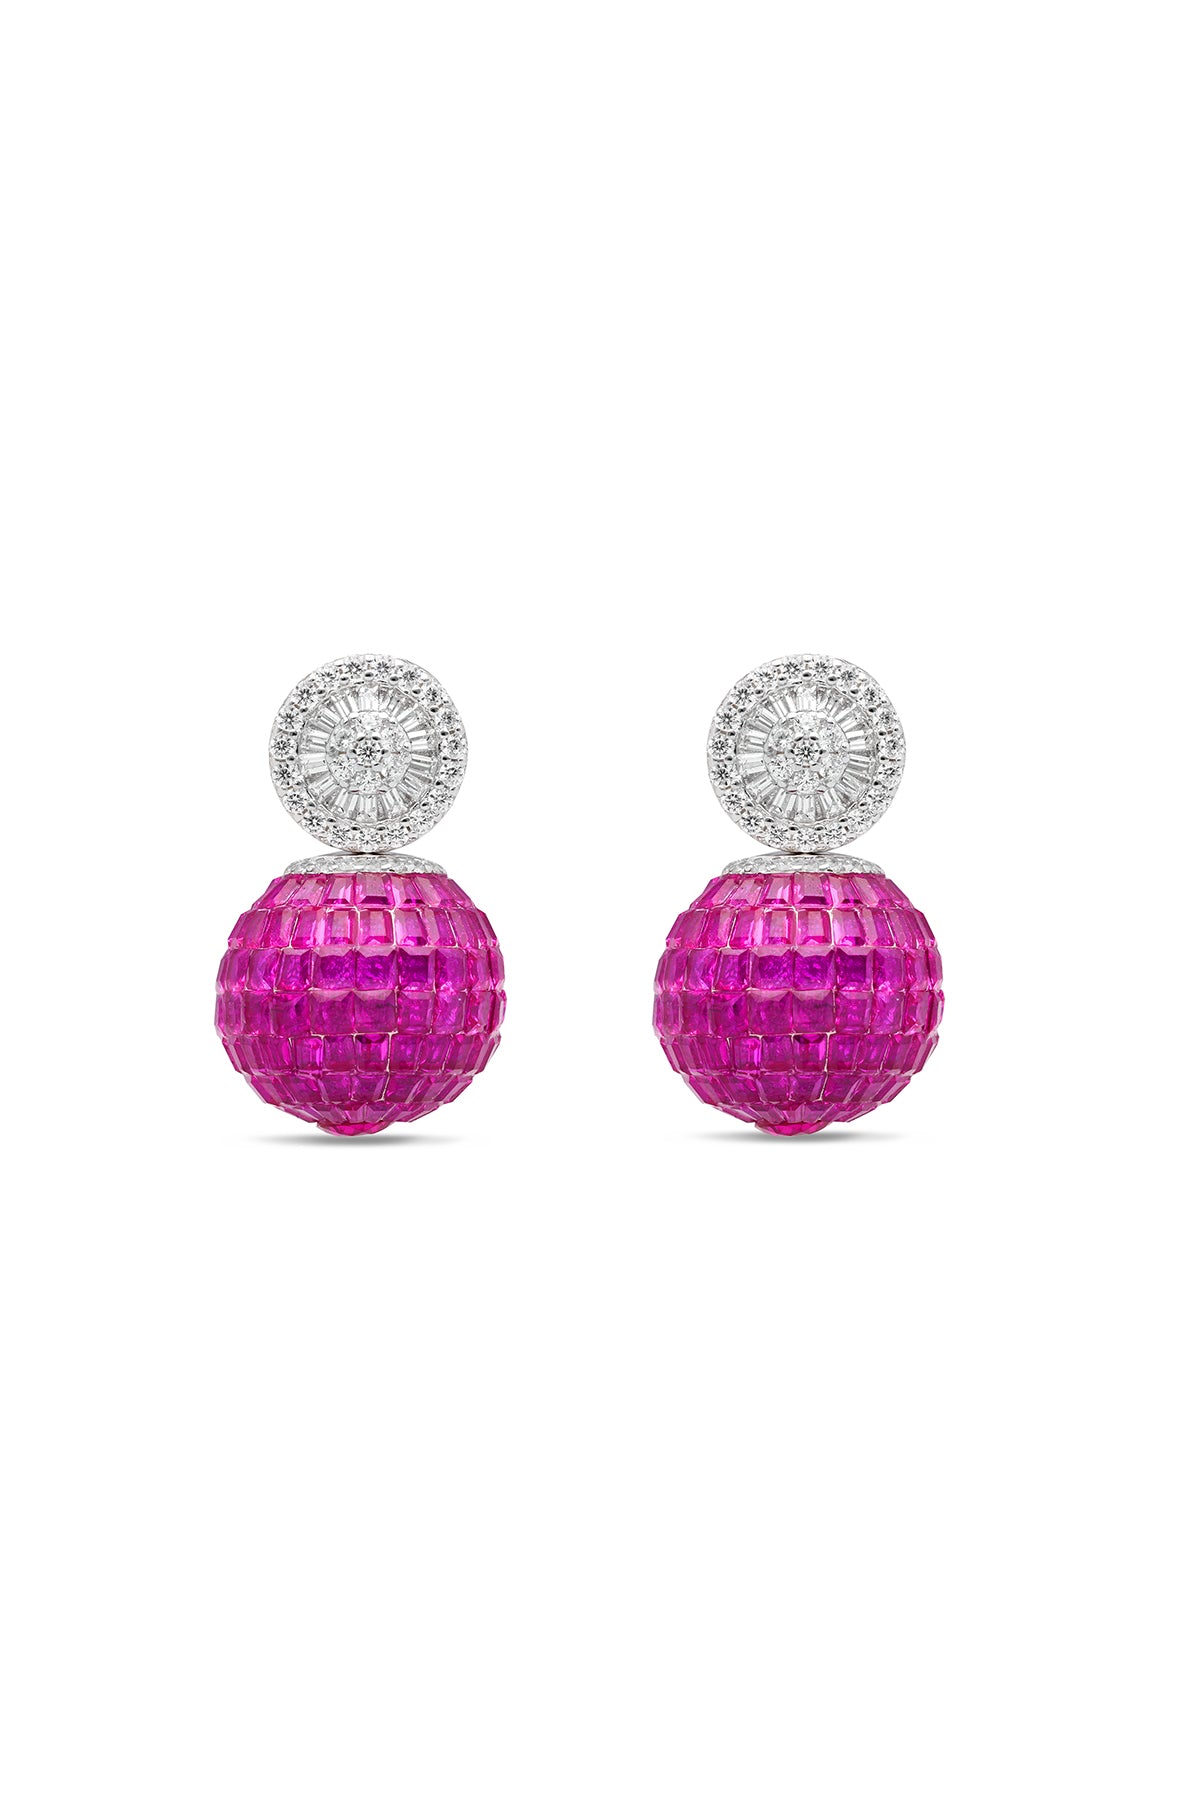 The Whimsy of the Bee Ruby Earrings